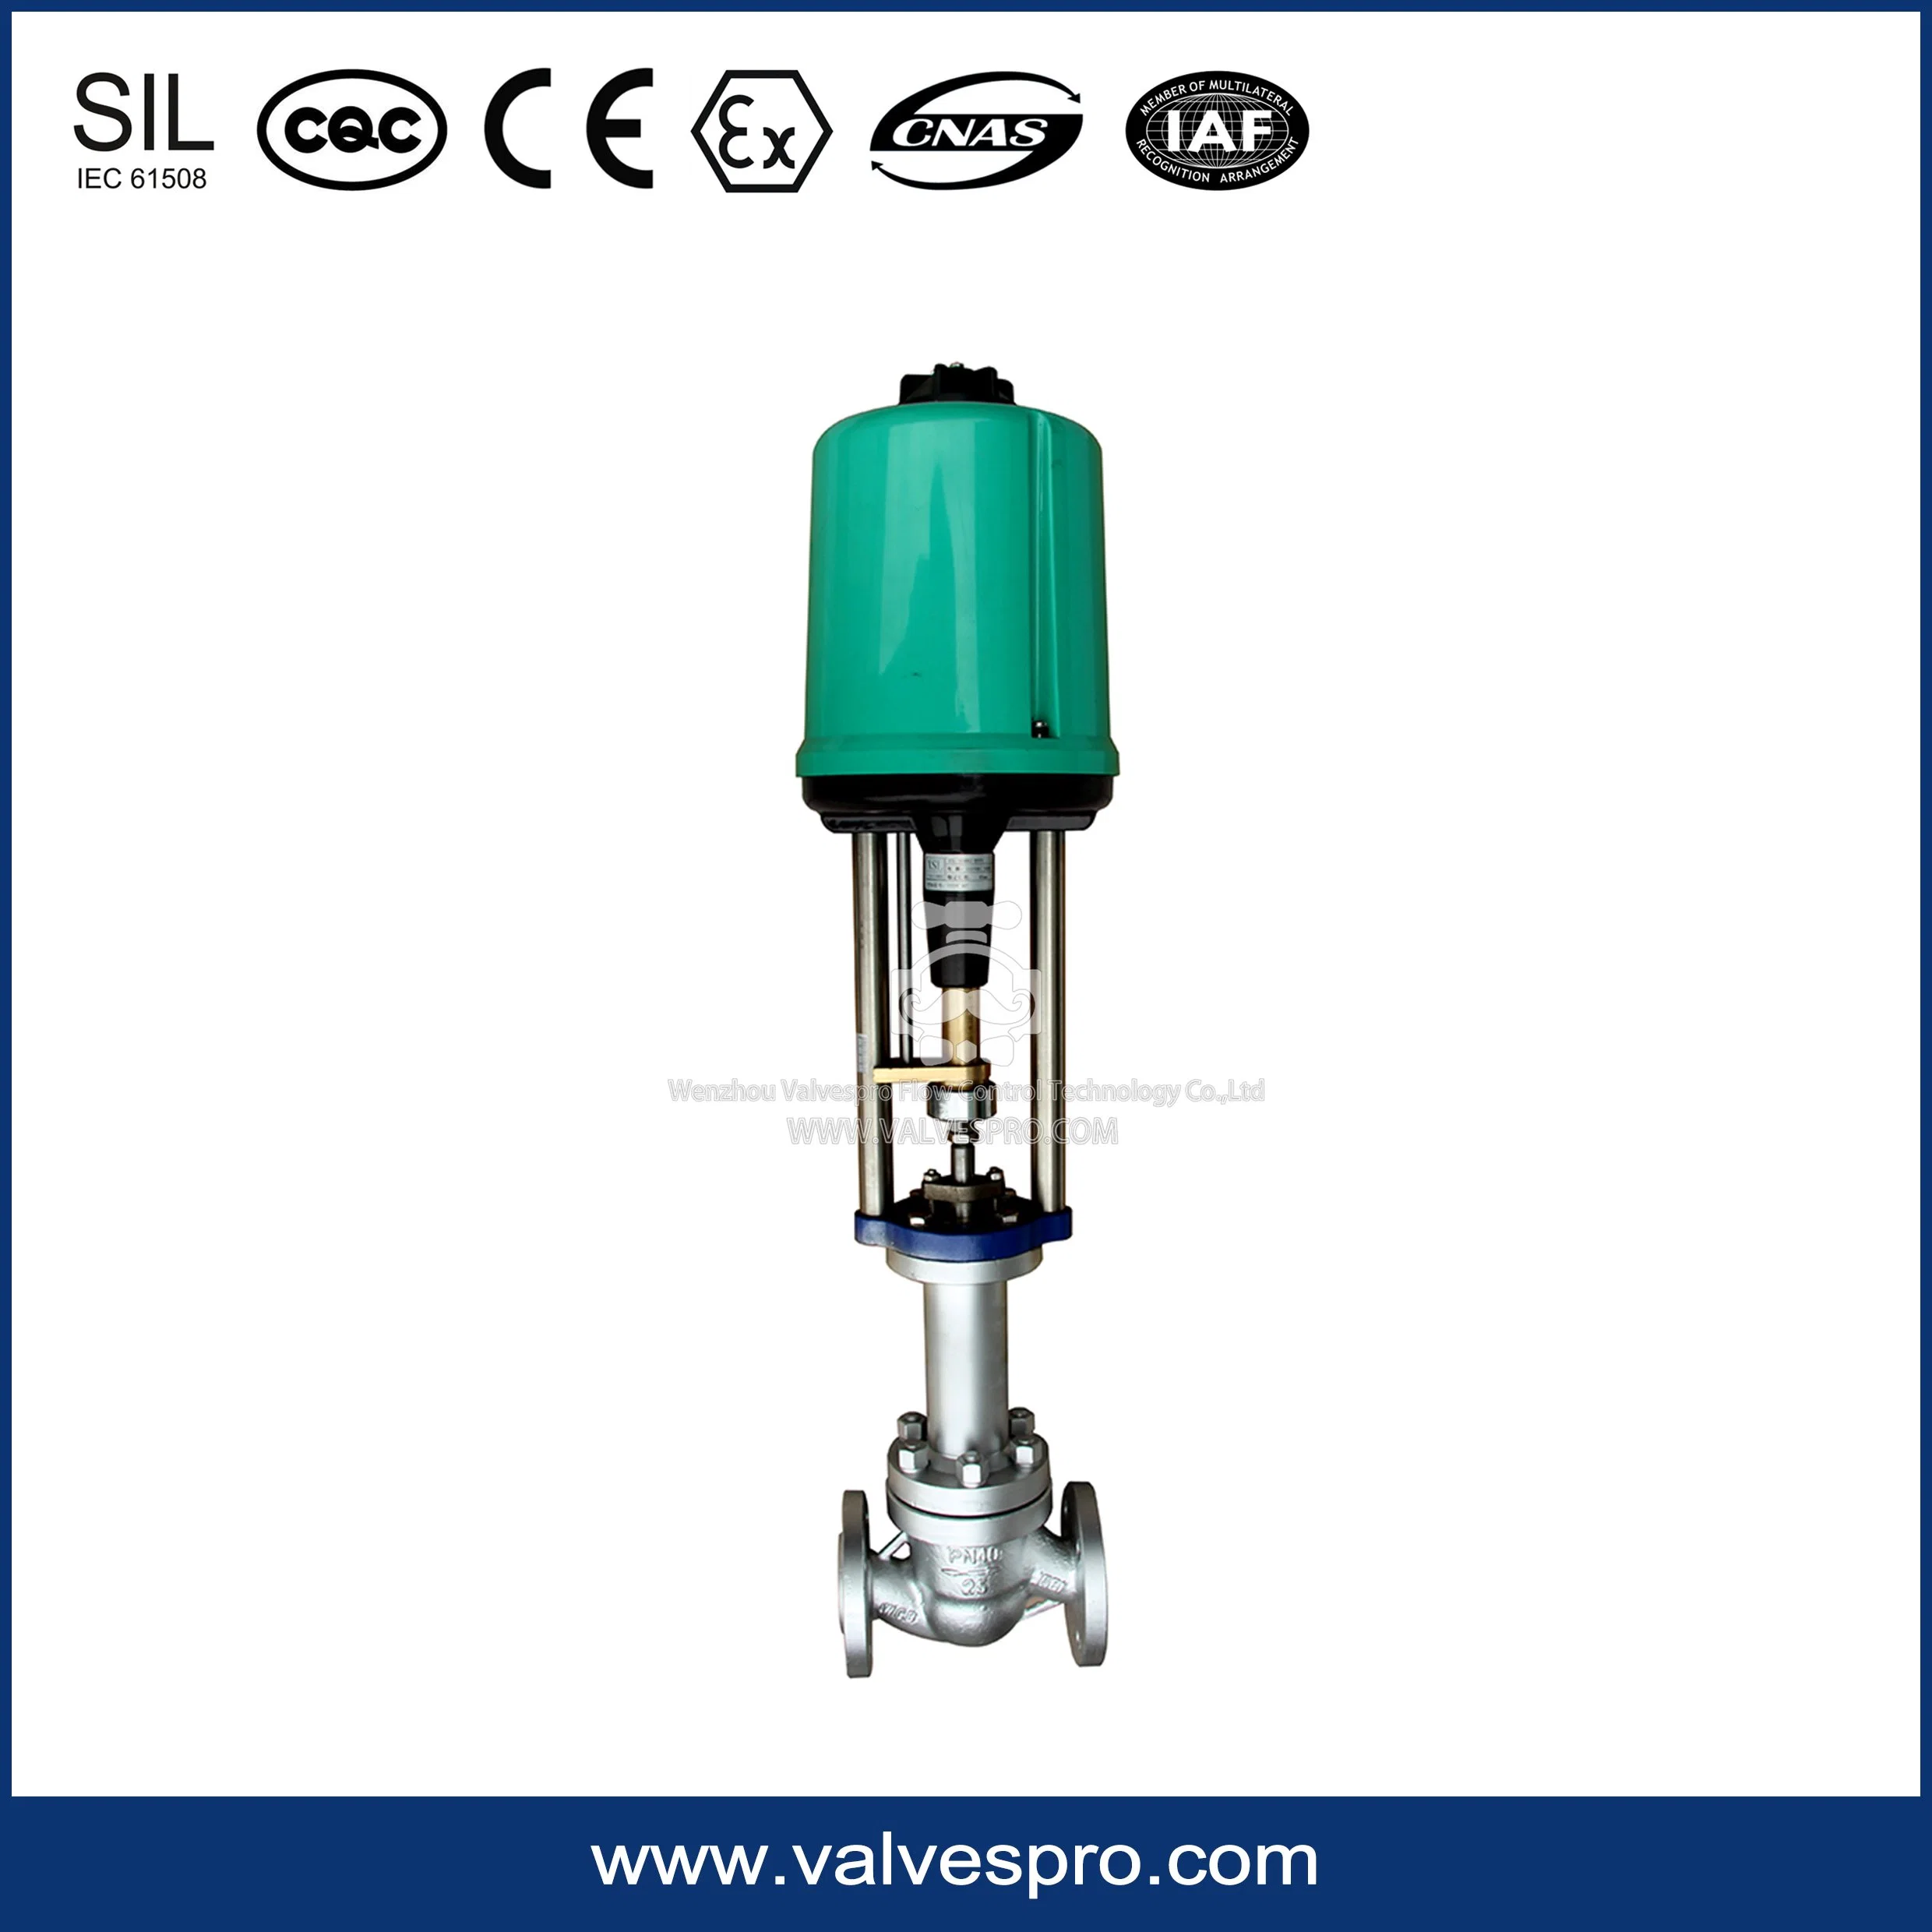 DN125 Electric Control Valve for Hot Oil or Steam Regulation Type Heat Oil Transfer 2-Way 3-Way Bellows Seal Heat Insulation